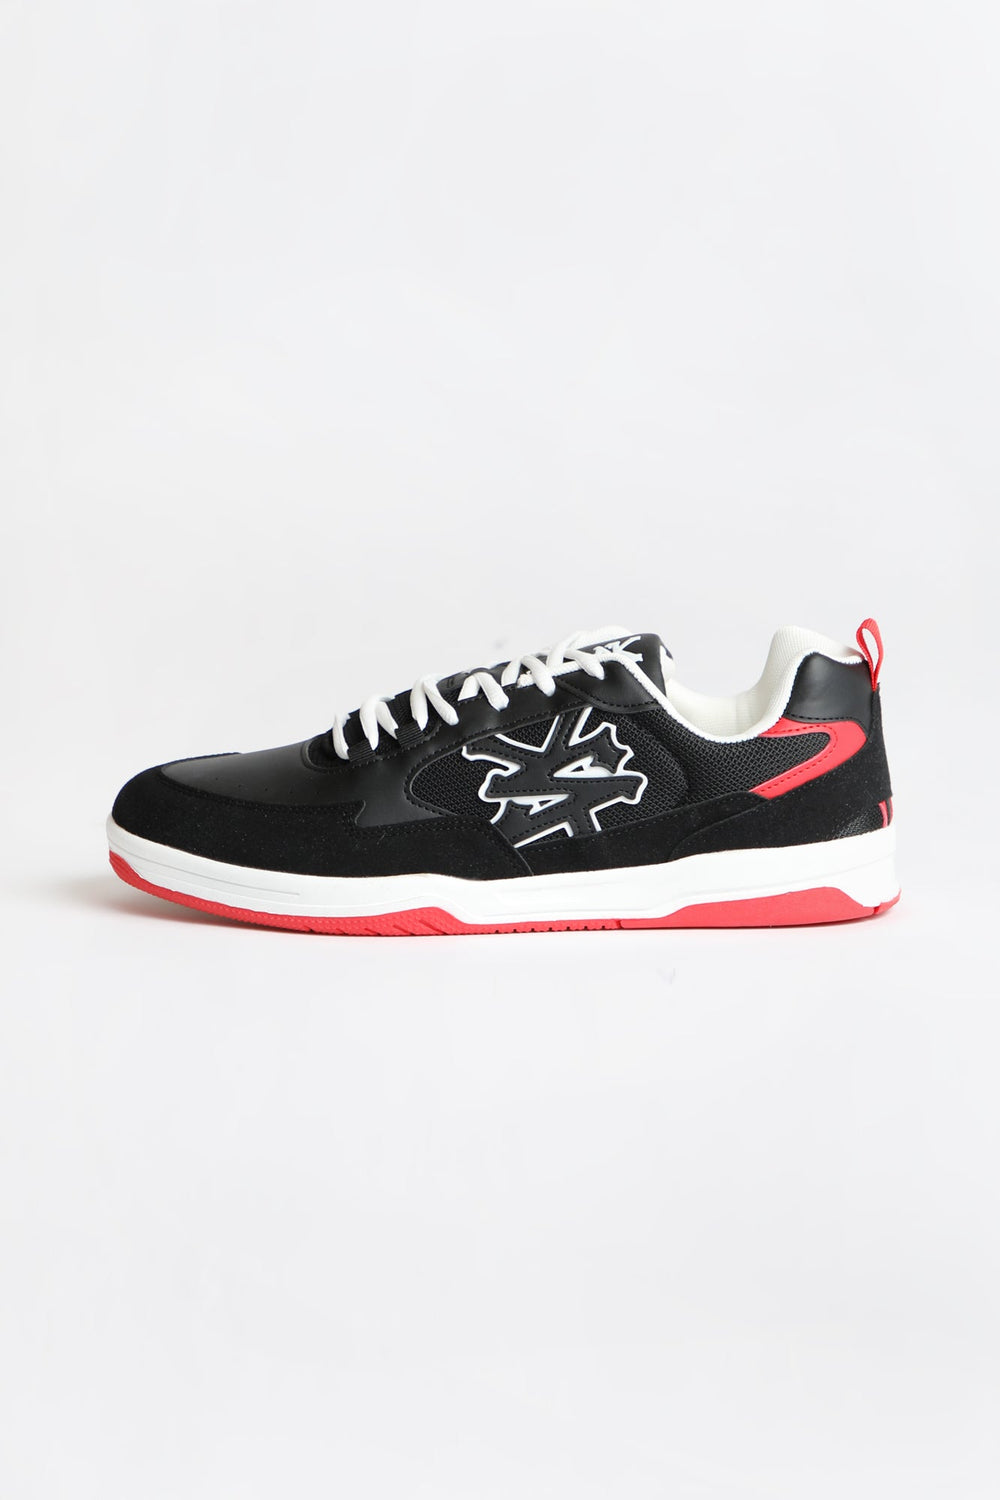 Zoo York Mens Athletic Shoes Zoo York Mens Athletic Shoes